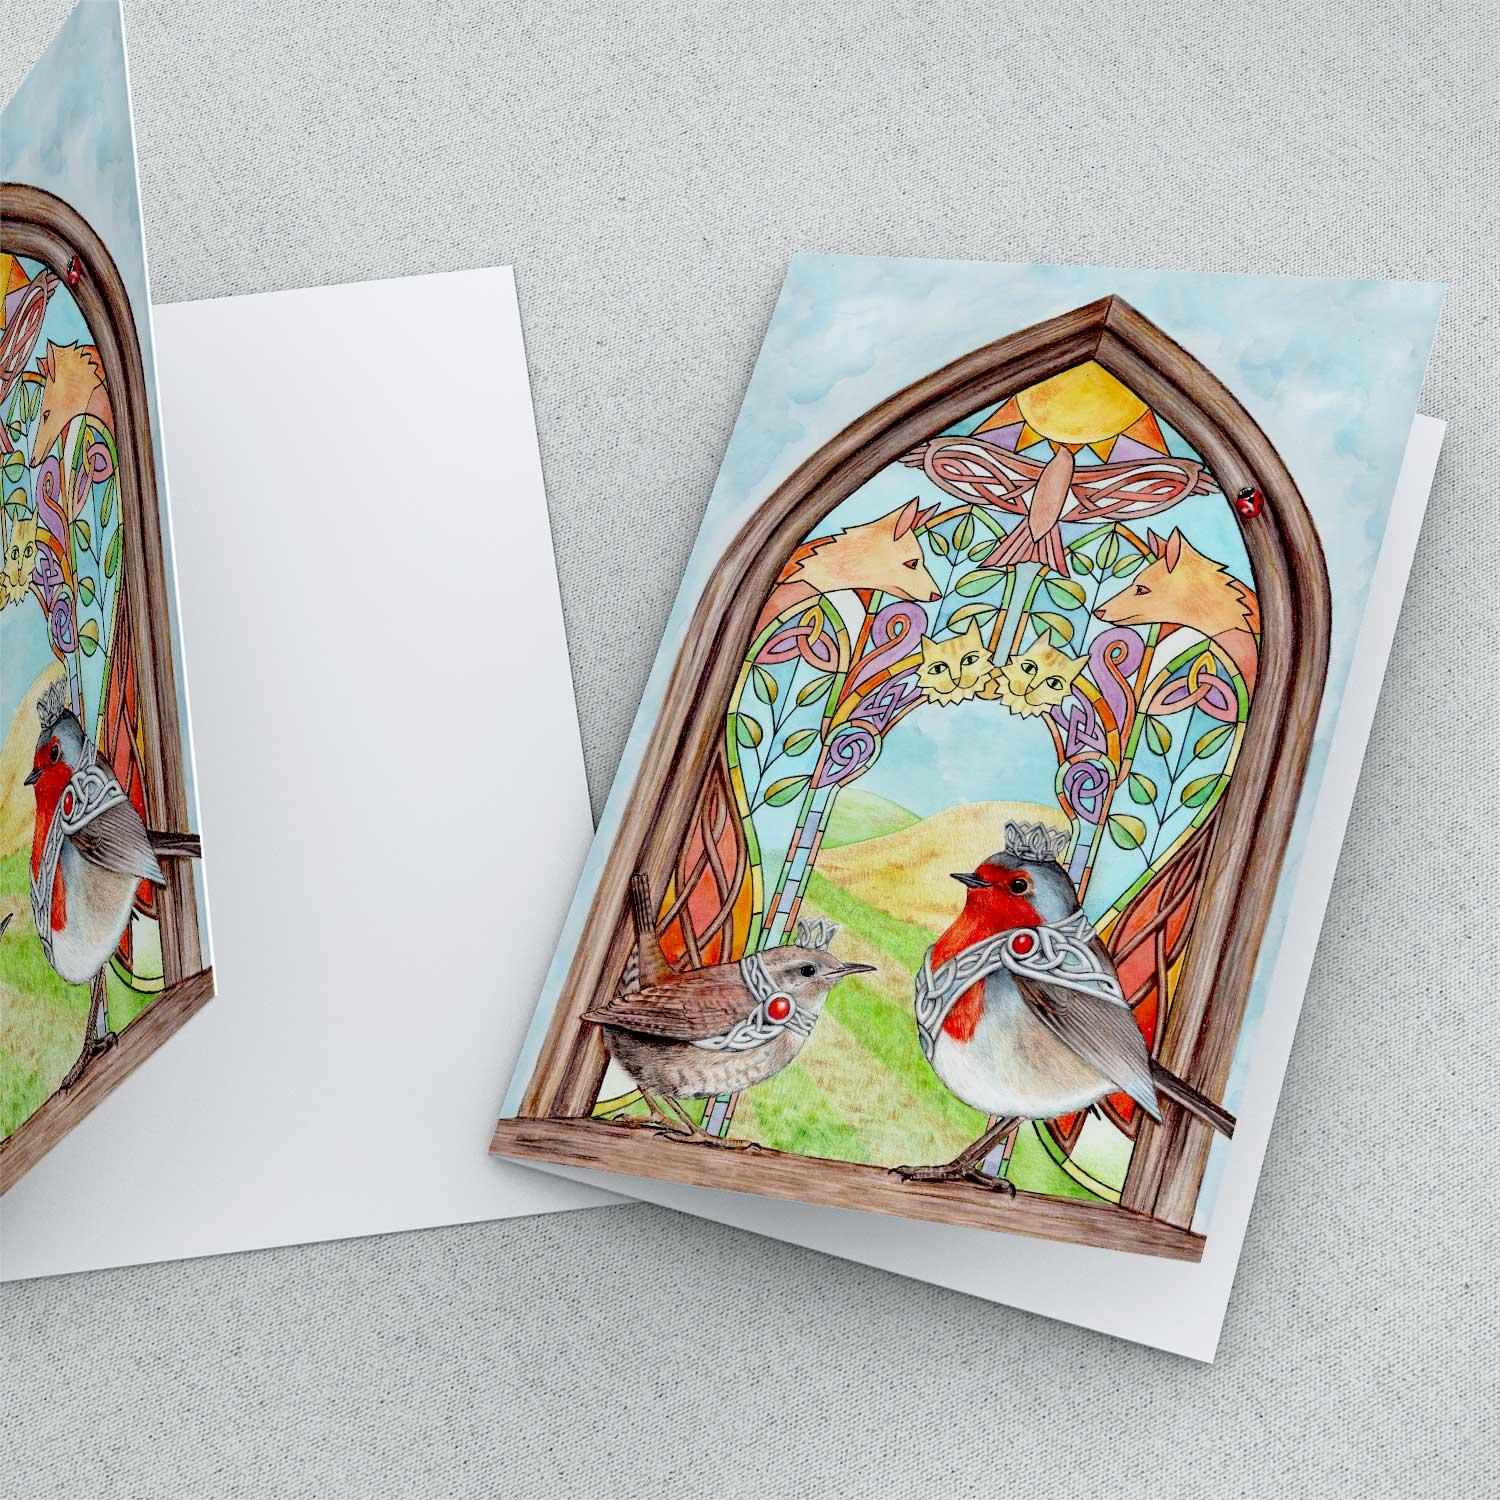 Robin and Wren Greeting Card from an original painting by artist Marjory Tait